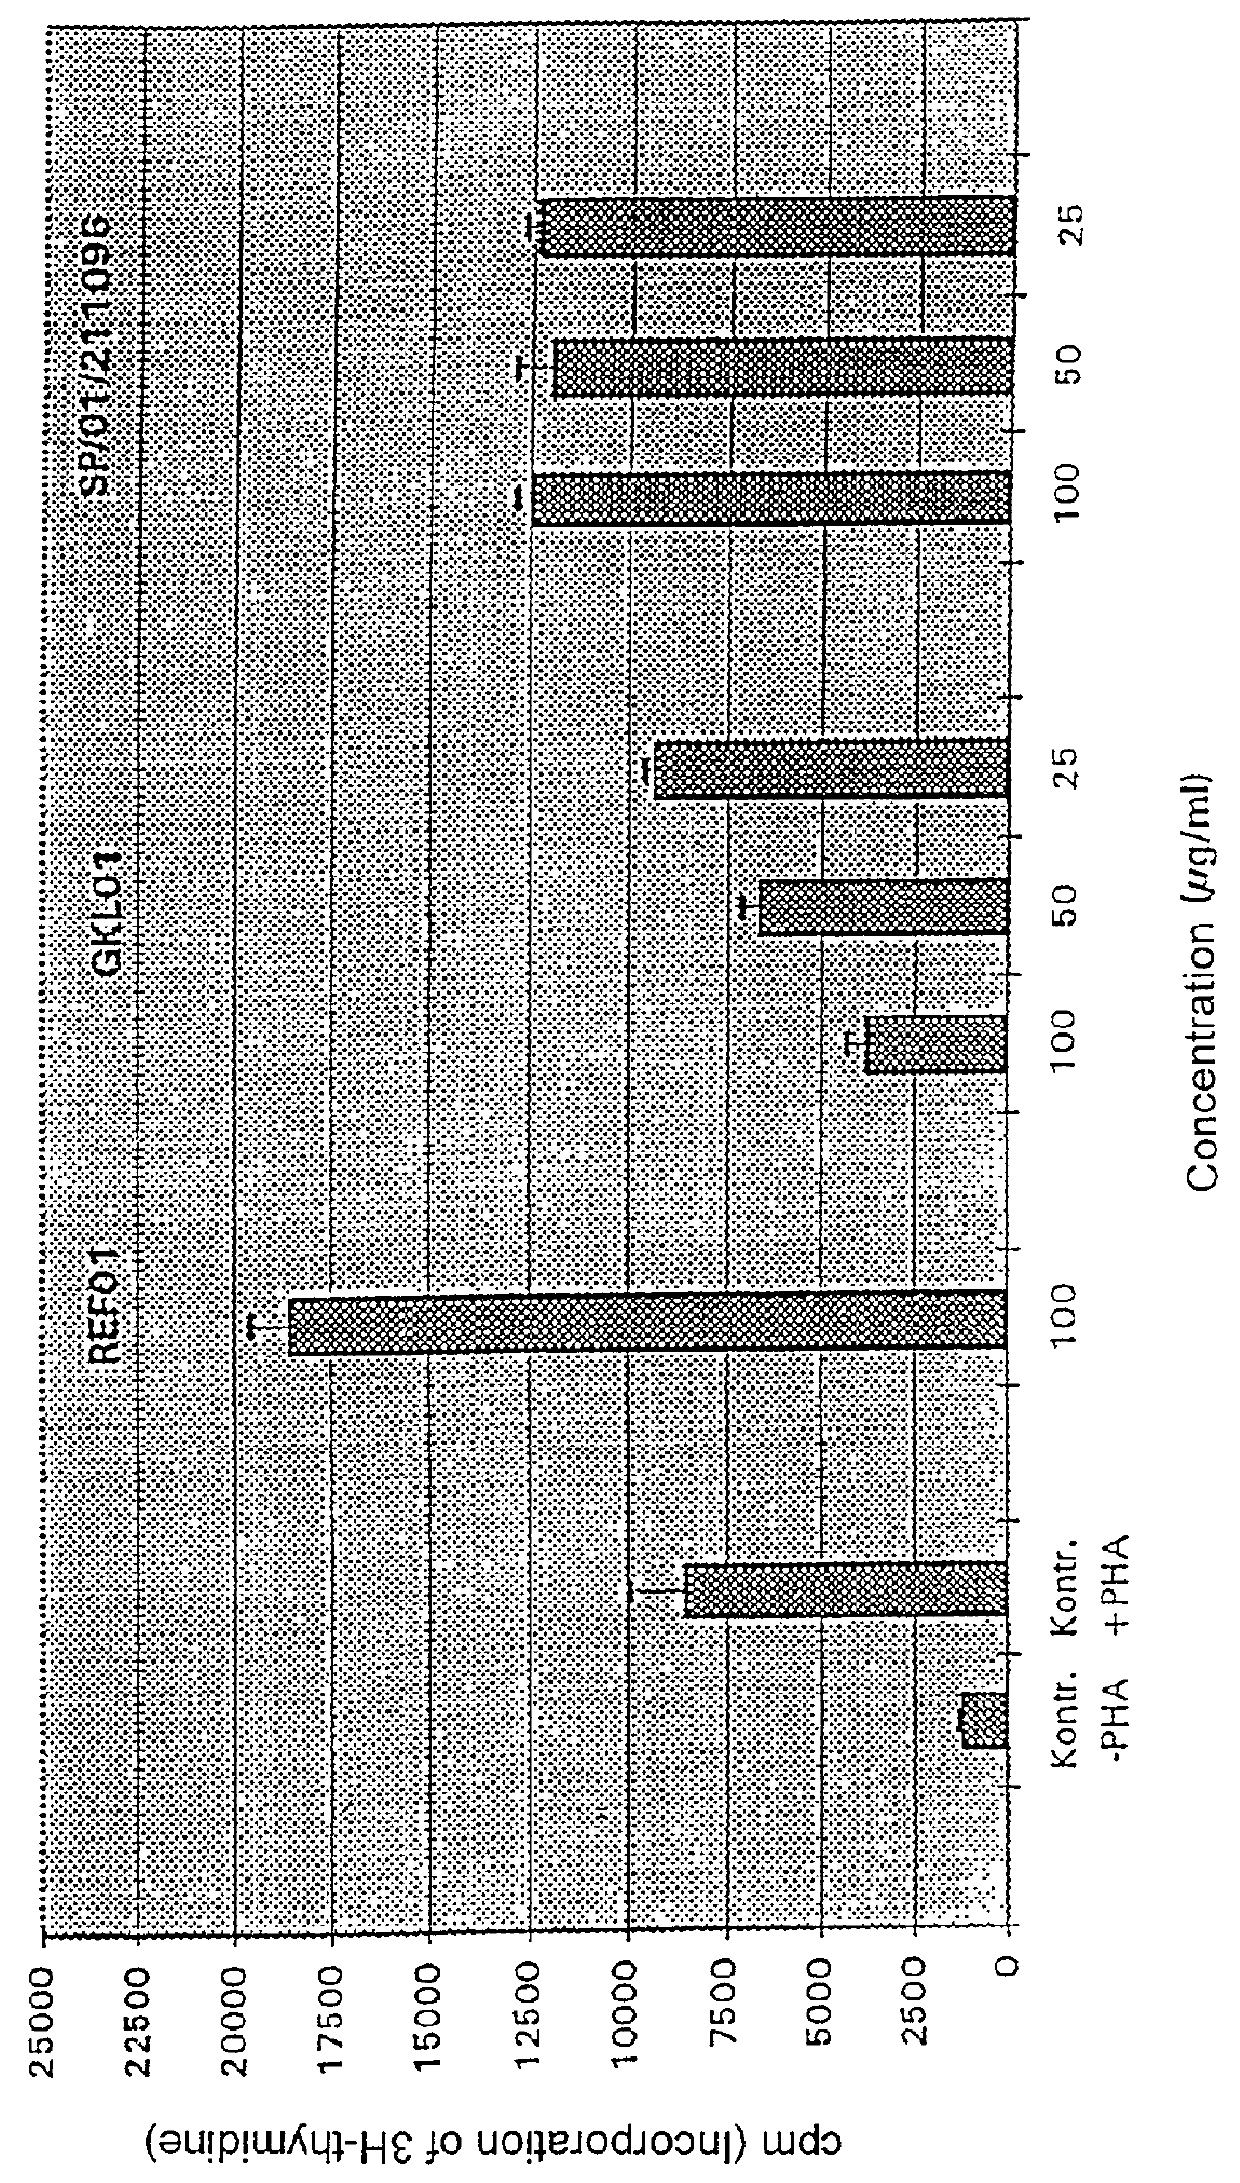 Synthetic, statistic thymic peptide combination and its use as a preparation with immunological and/or endocrinological effect